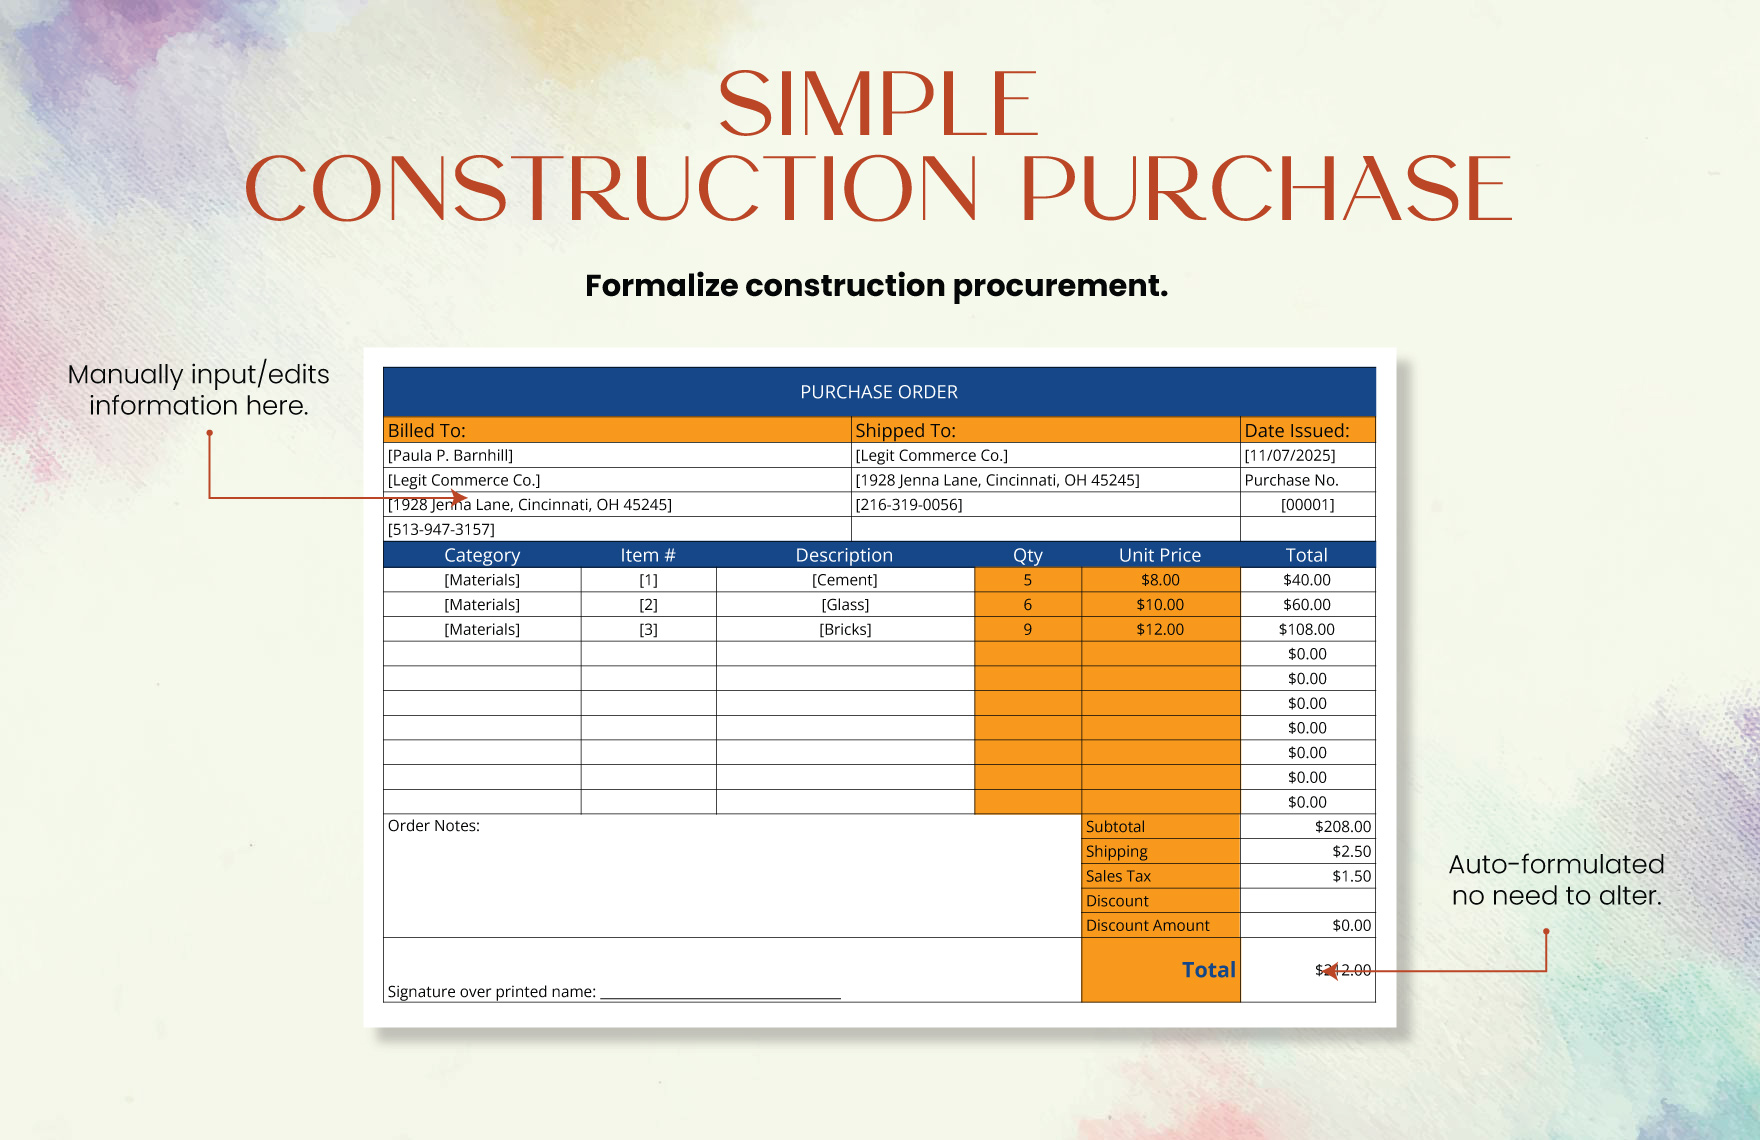 Simple Construction Purchase Template